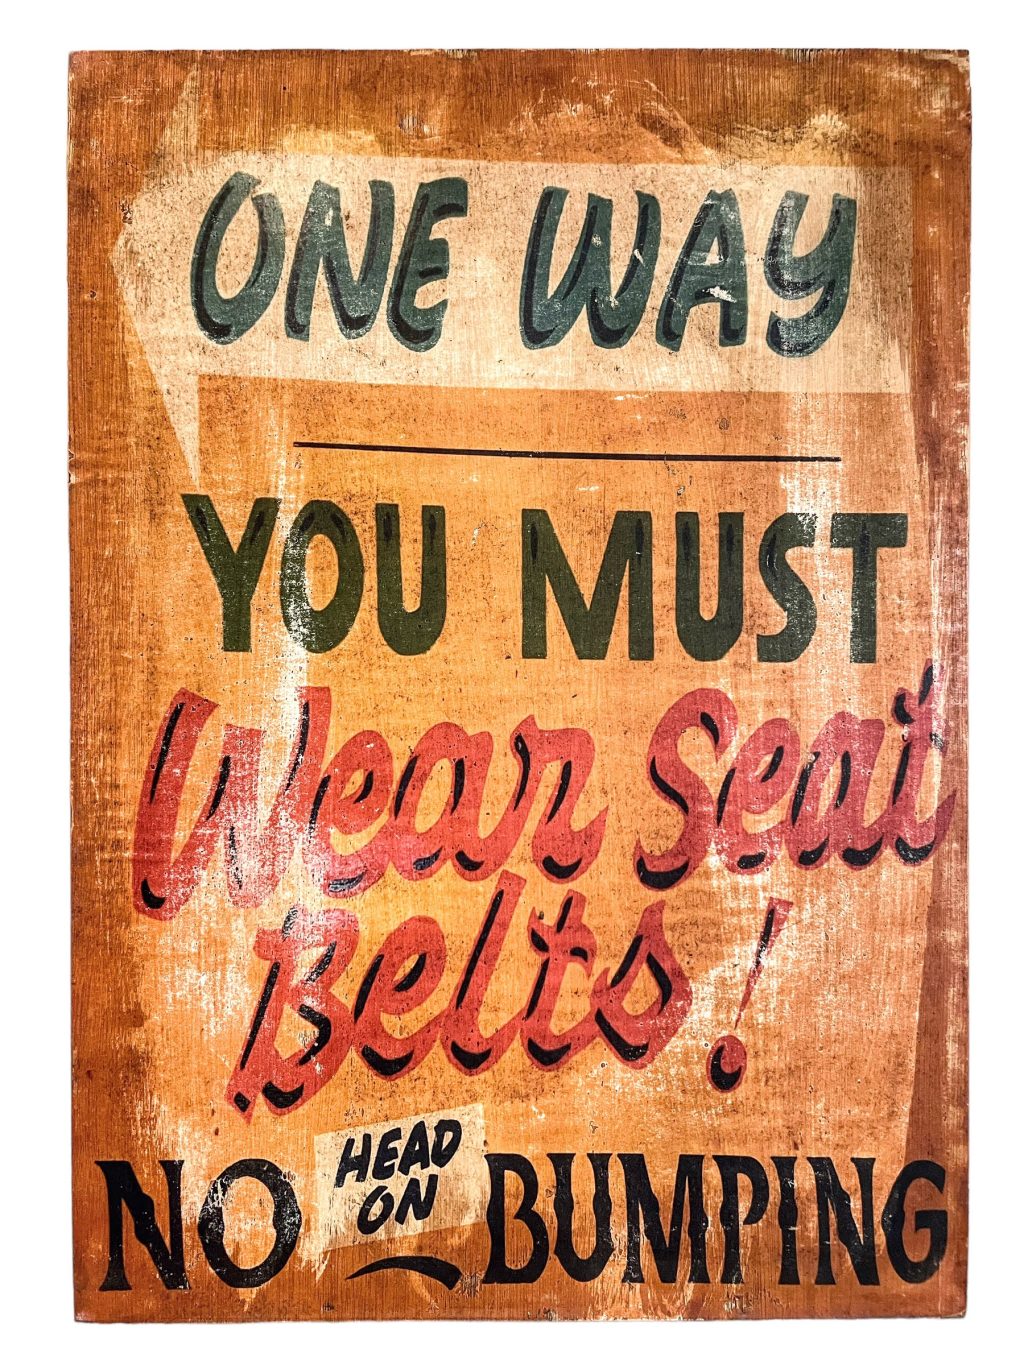 English Bumper Car One Way You Must Wear Seat Belts Reproduction Sign Display Fairground Circus Attraction Wall Decor On Wooden Board